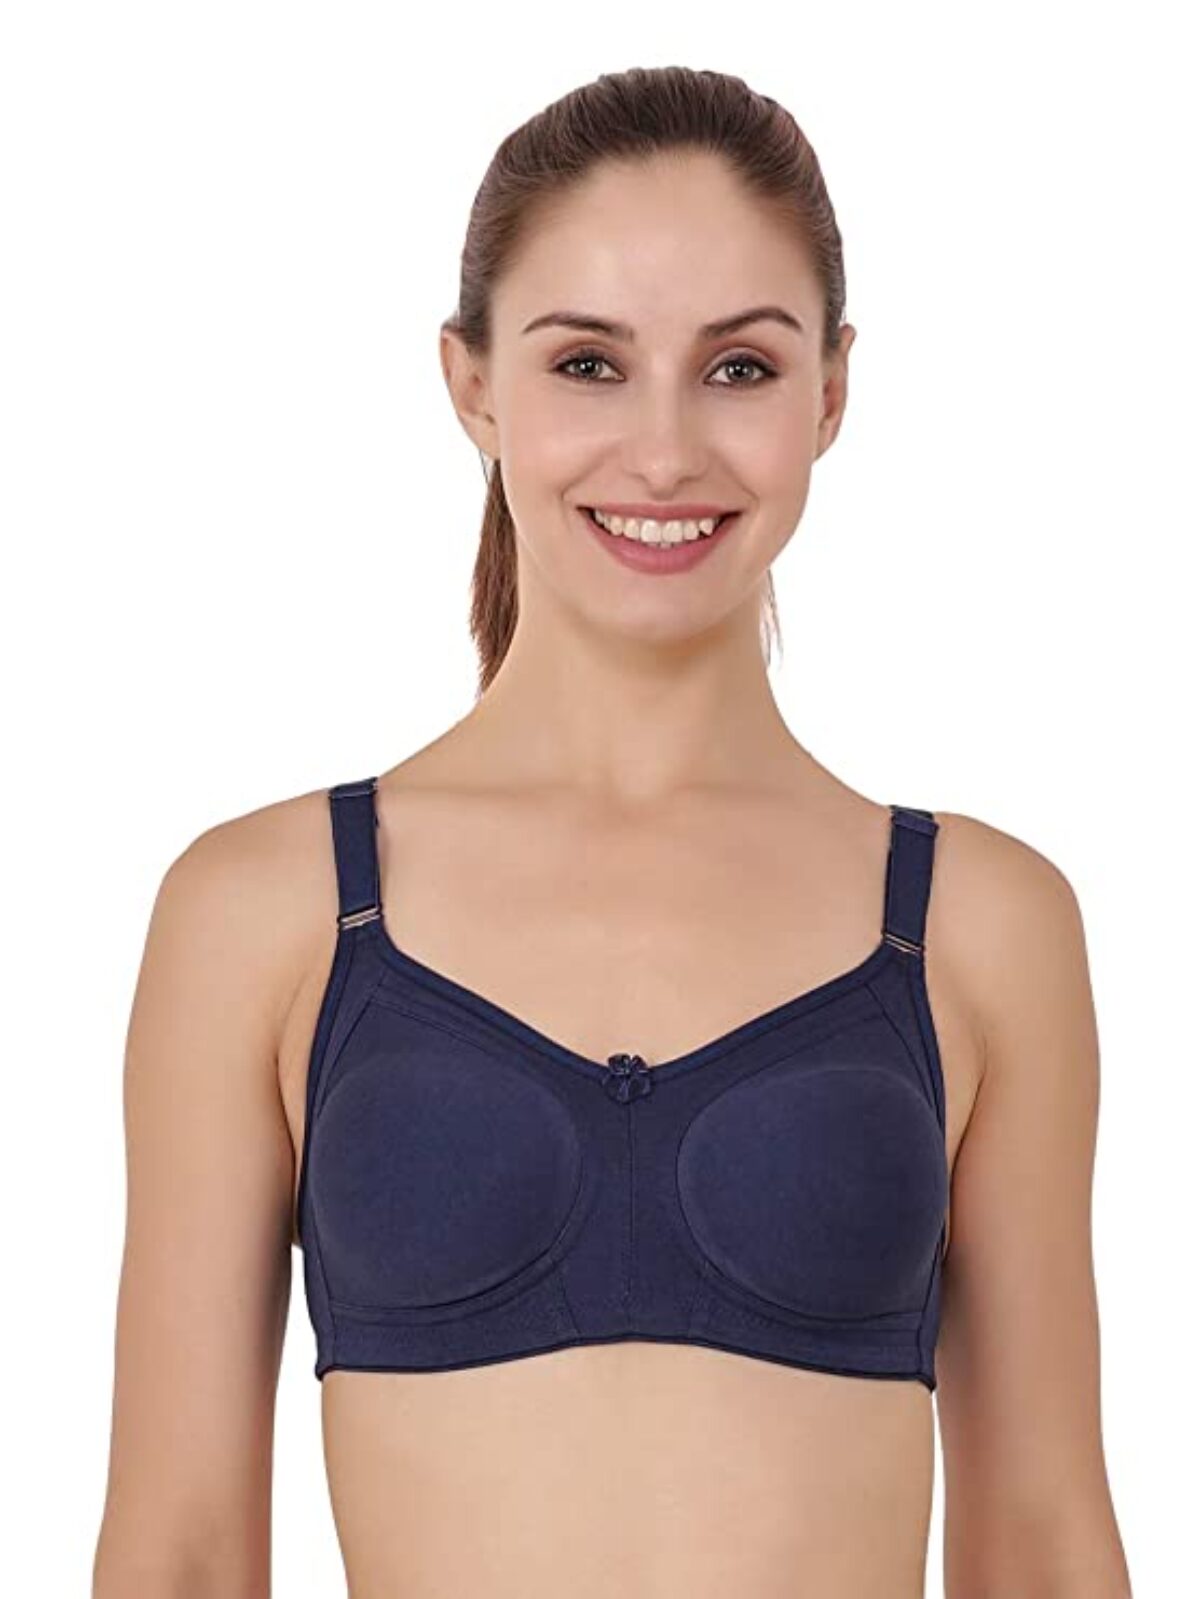 Wireless Bra for Sagging Breasts